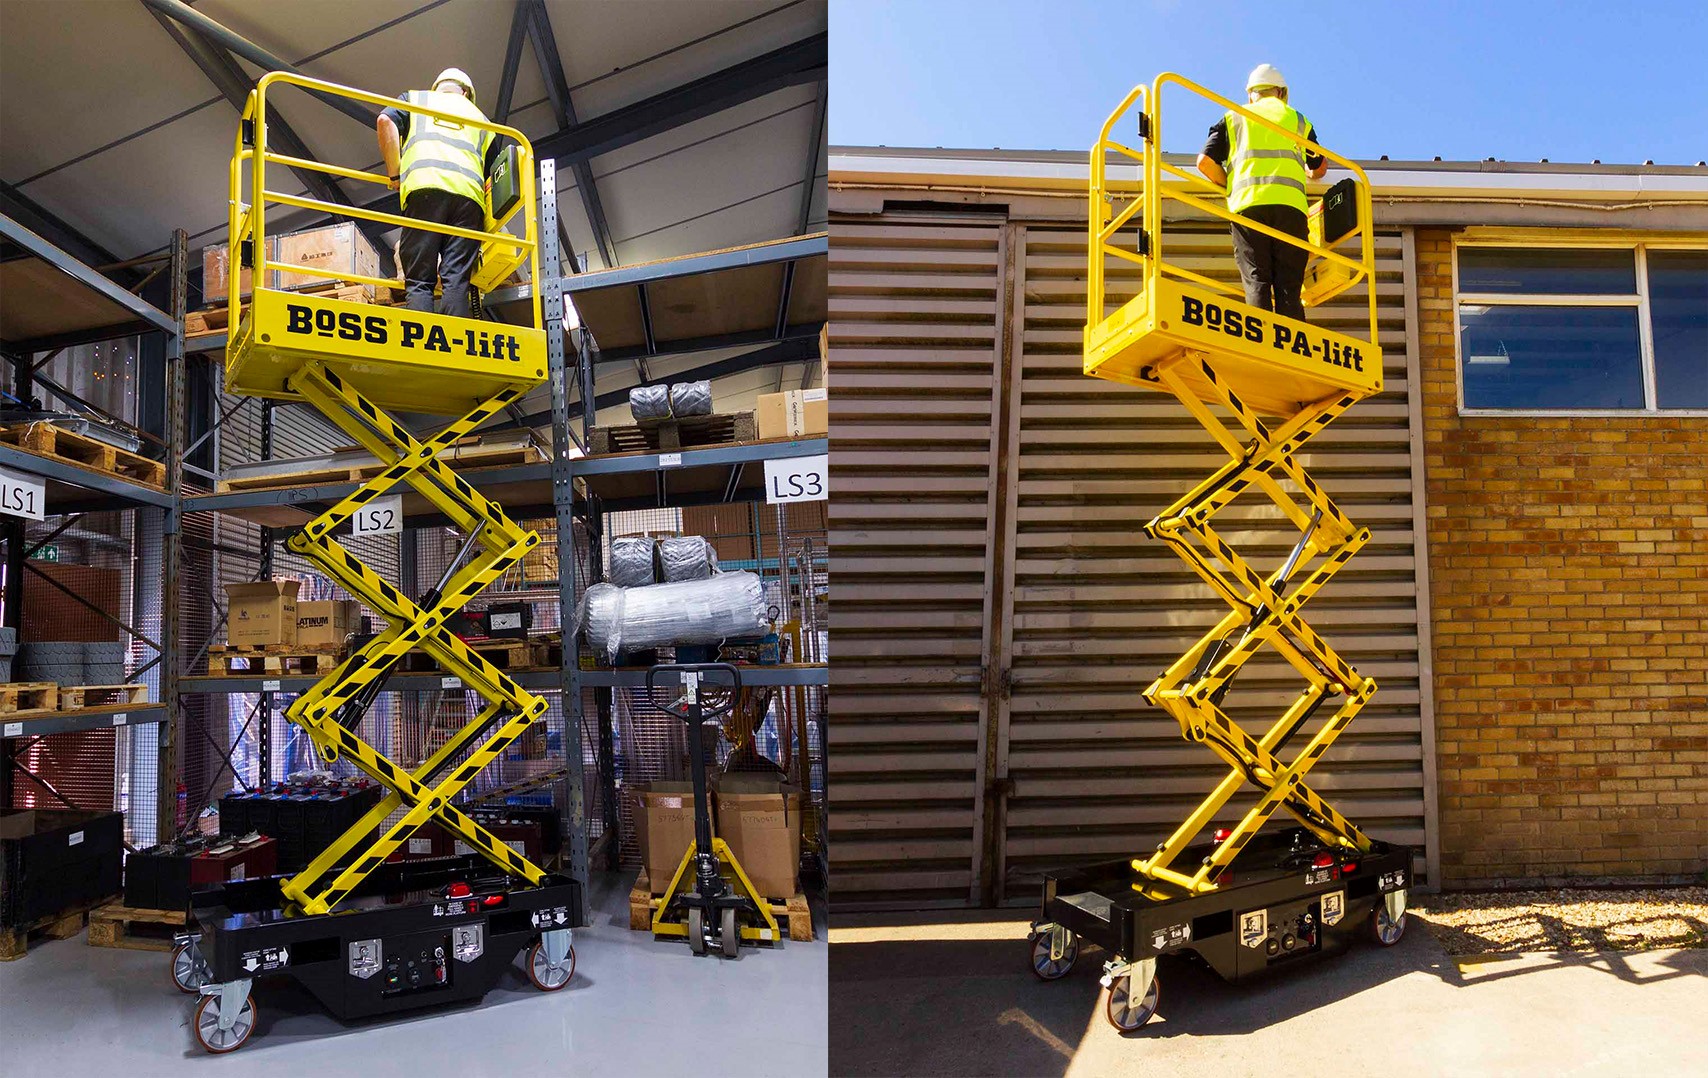 BoSS PA-lift gets outdoor rating in performance uplift